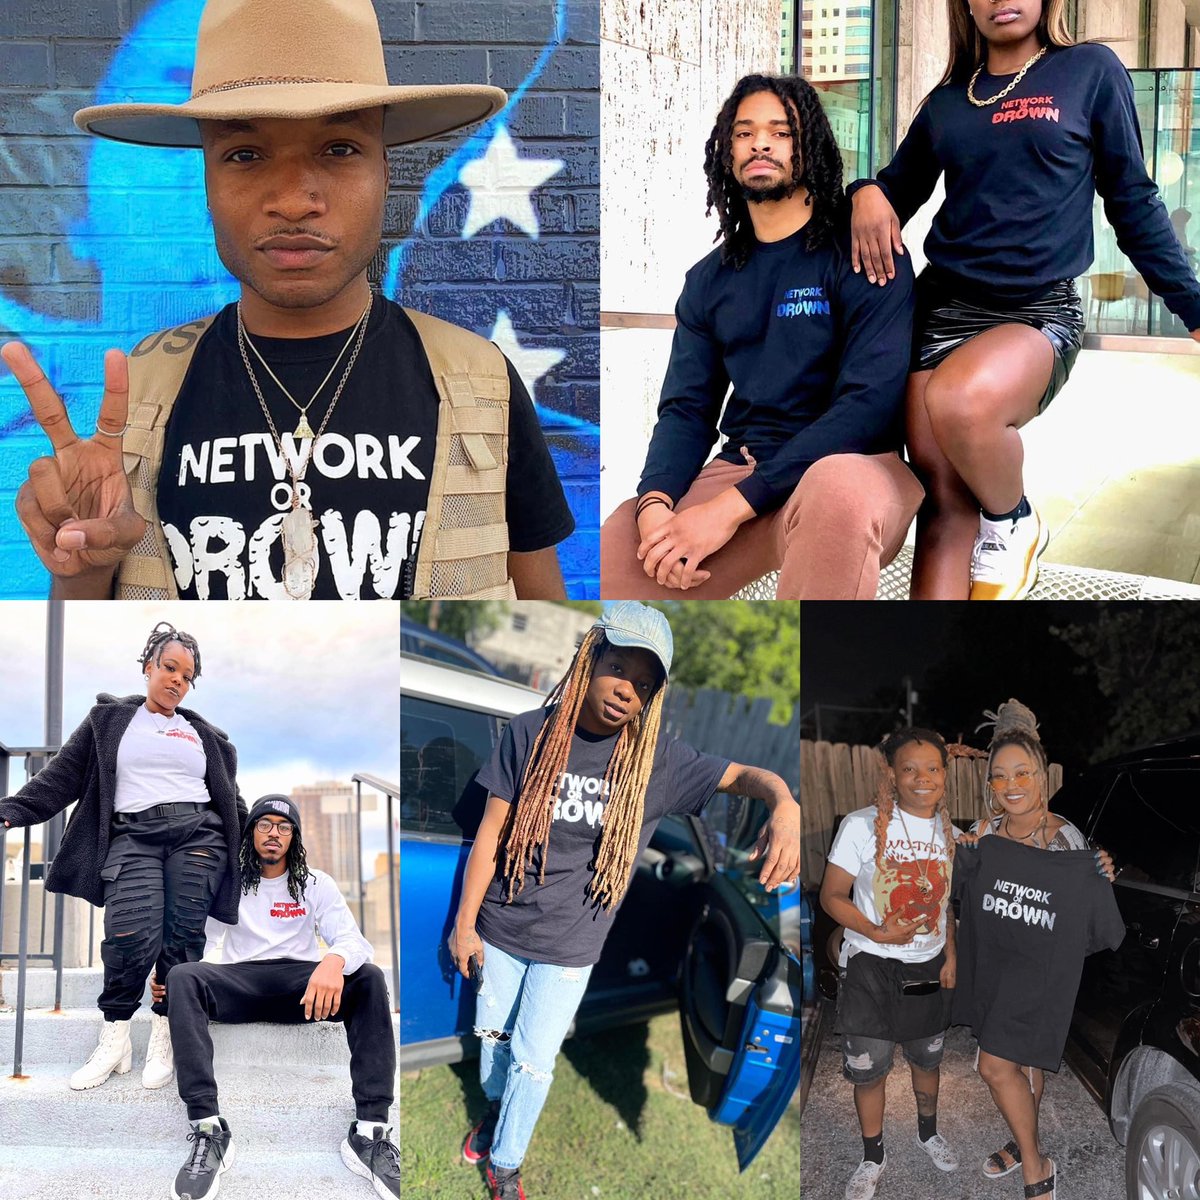 Happy #BlackHistoryMonth ✊🏾Support #BlackQueer own business’s like #CarefreeQueer🌵 rapper @Clutch_b3rz clothing line #NetworkOrDrown💧 and her media page #NodTvMedia ✨